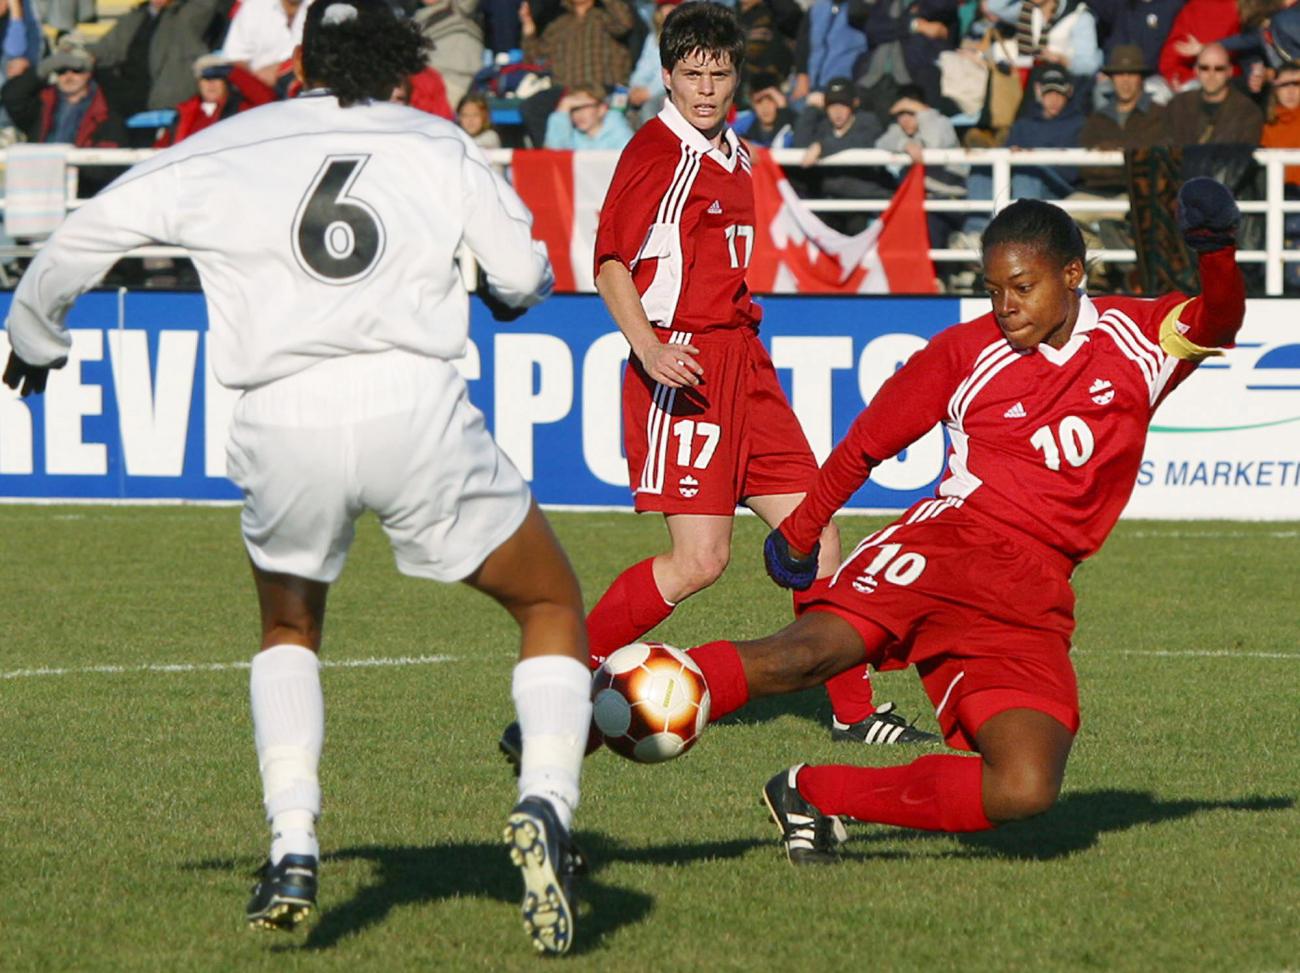 Charmaine Hooper in red on soccer field with two other players, one in red, the other in white.